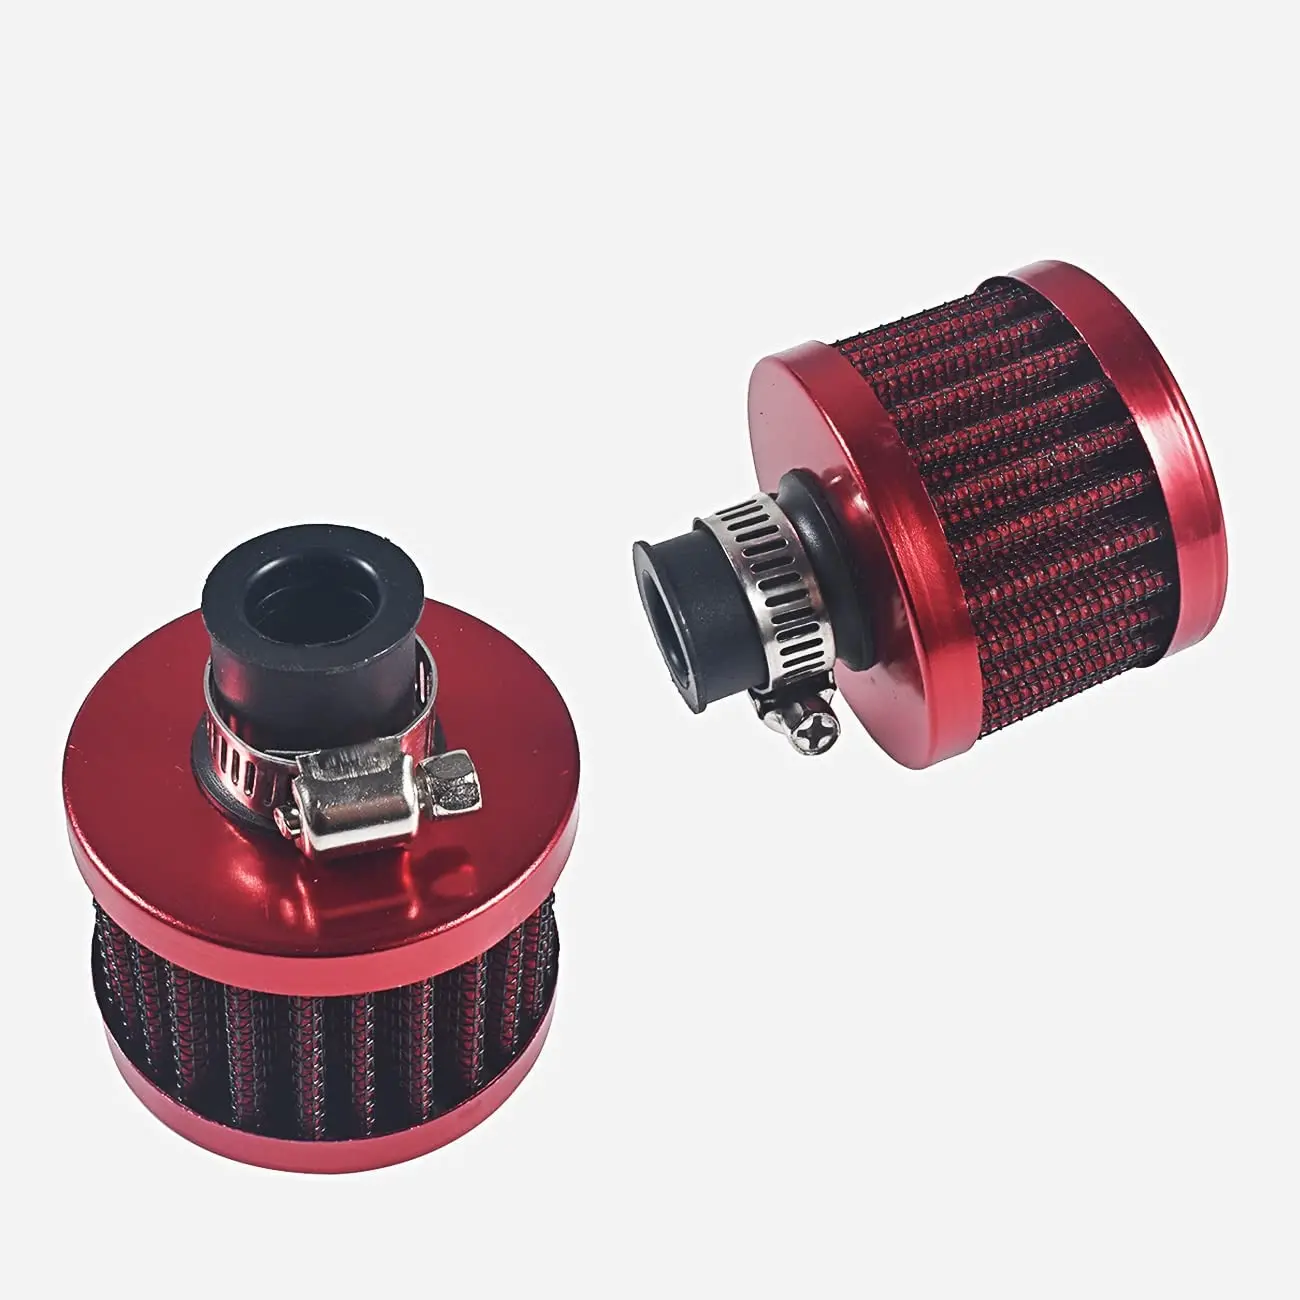 2pcs 12mm Red Cold Air Intake Filter Turbo Vent Crankcase Car Breather Valve Cover 2pcs 12mm mini universal sliver motor cone cold clean air intake filter turbo vent breather go kart